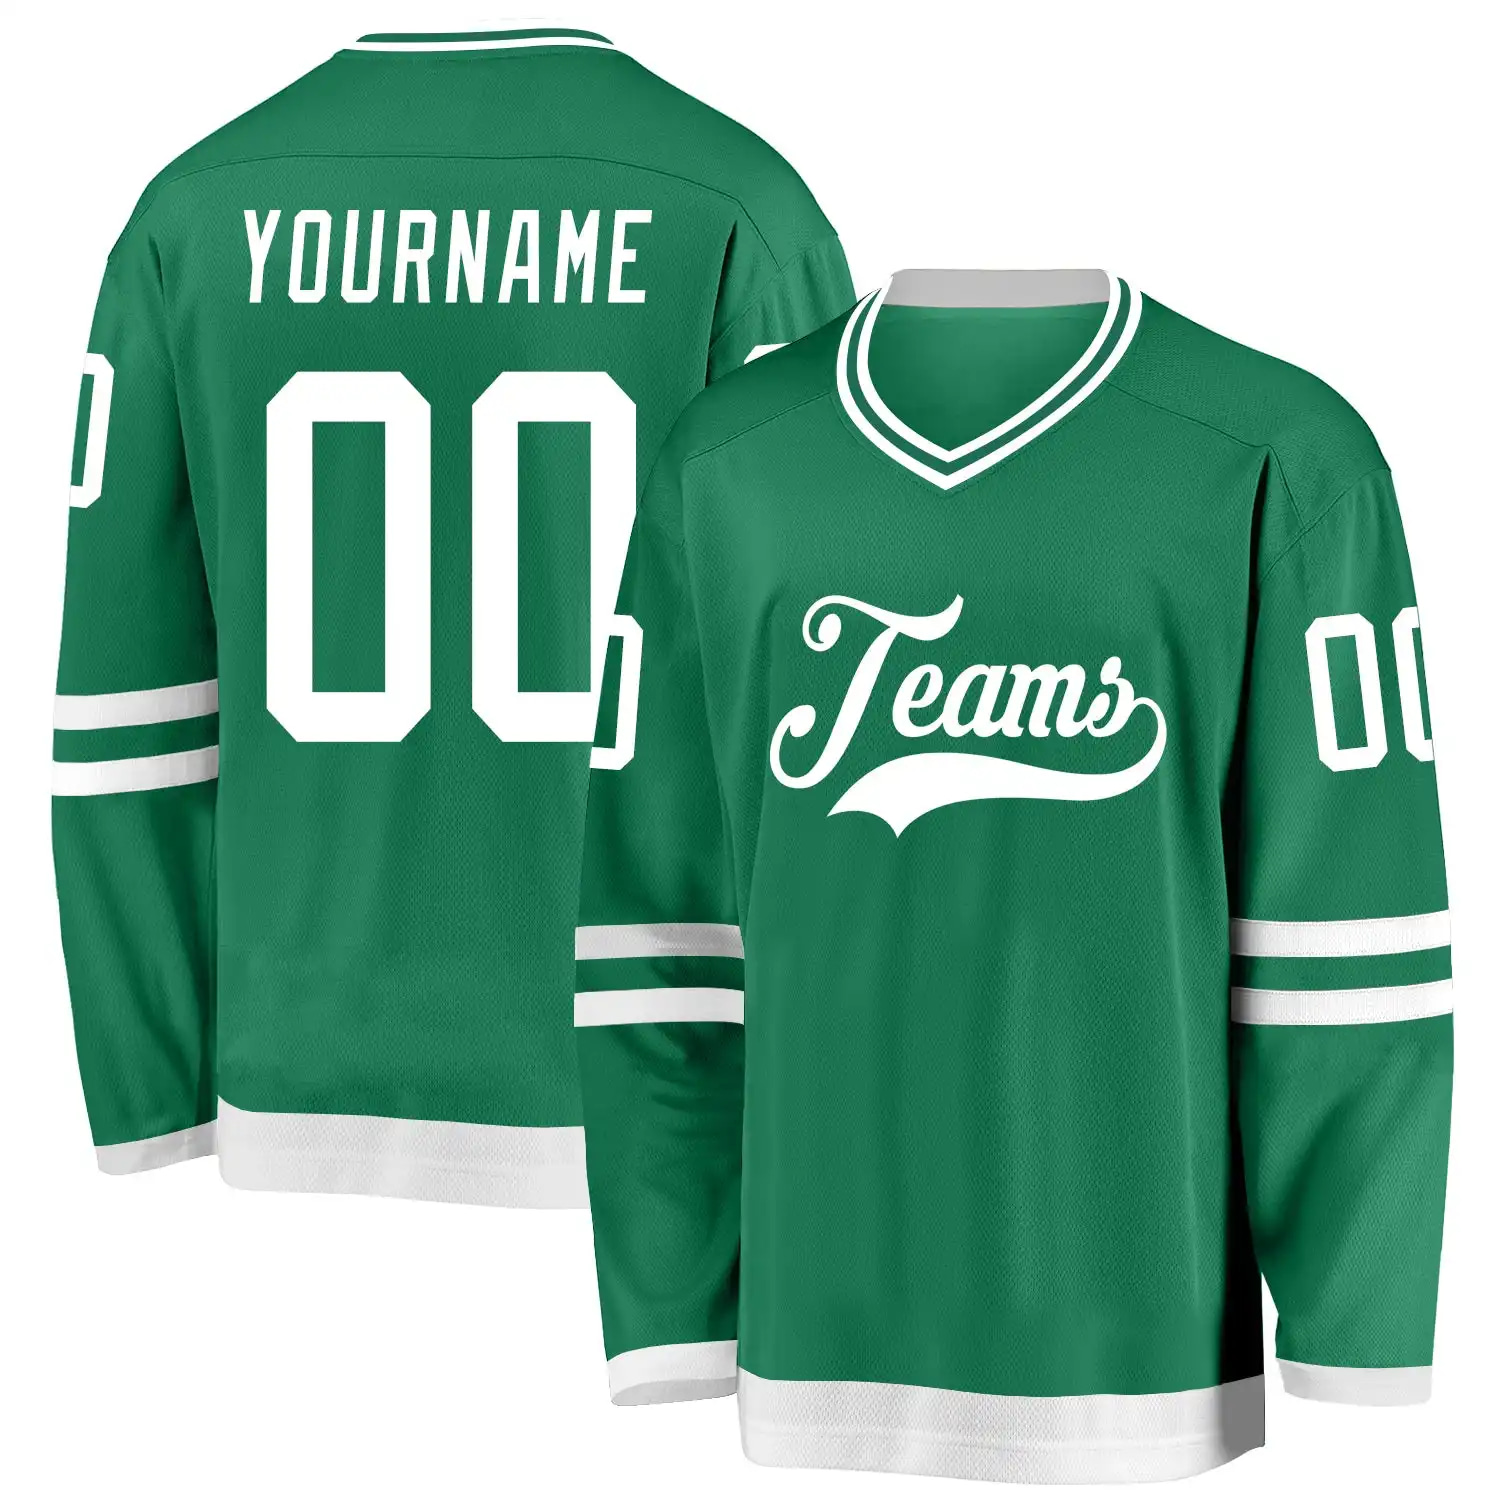 Stitched And Print Kelly Green White Hockey Jersey Custom